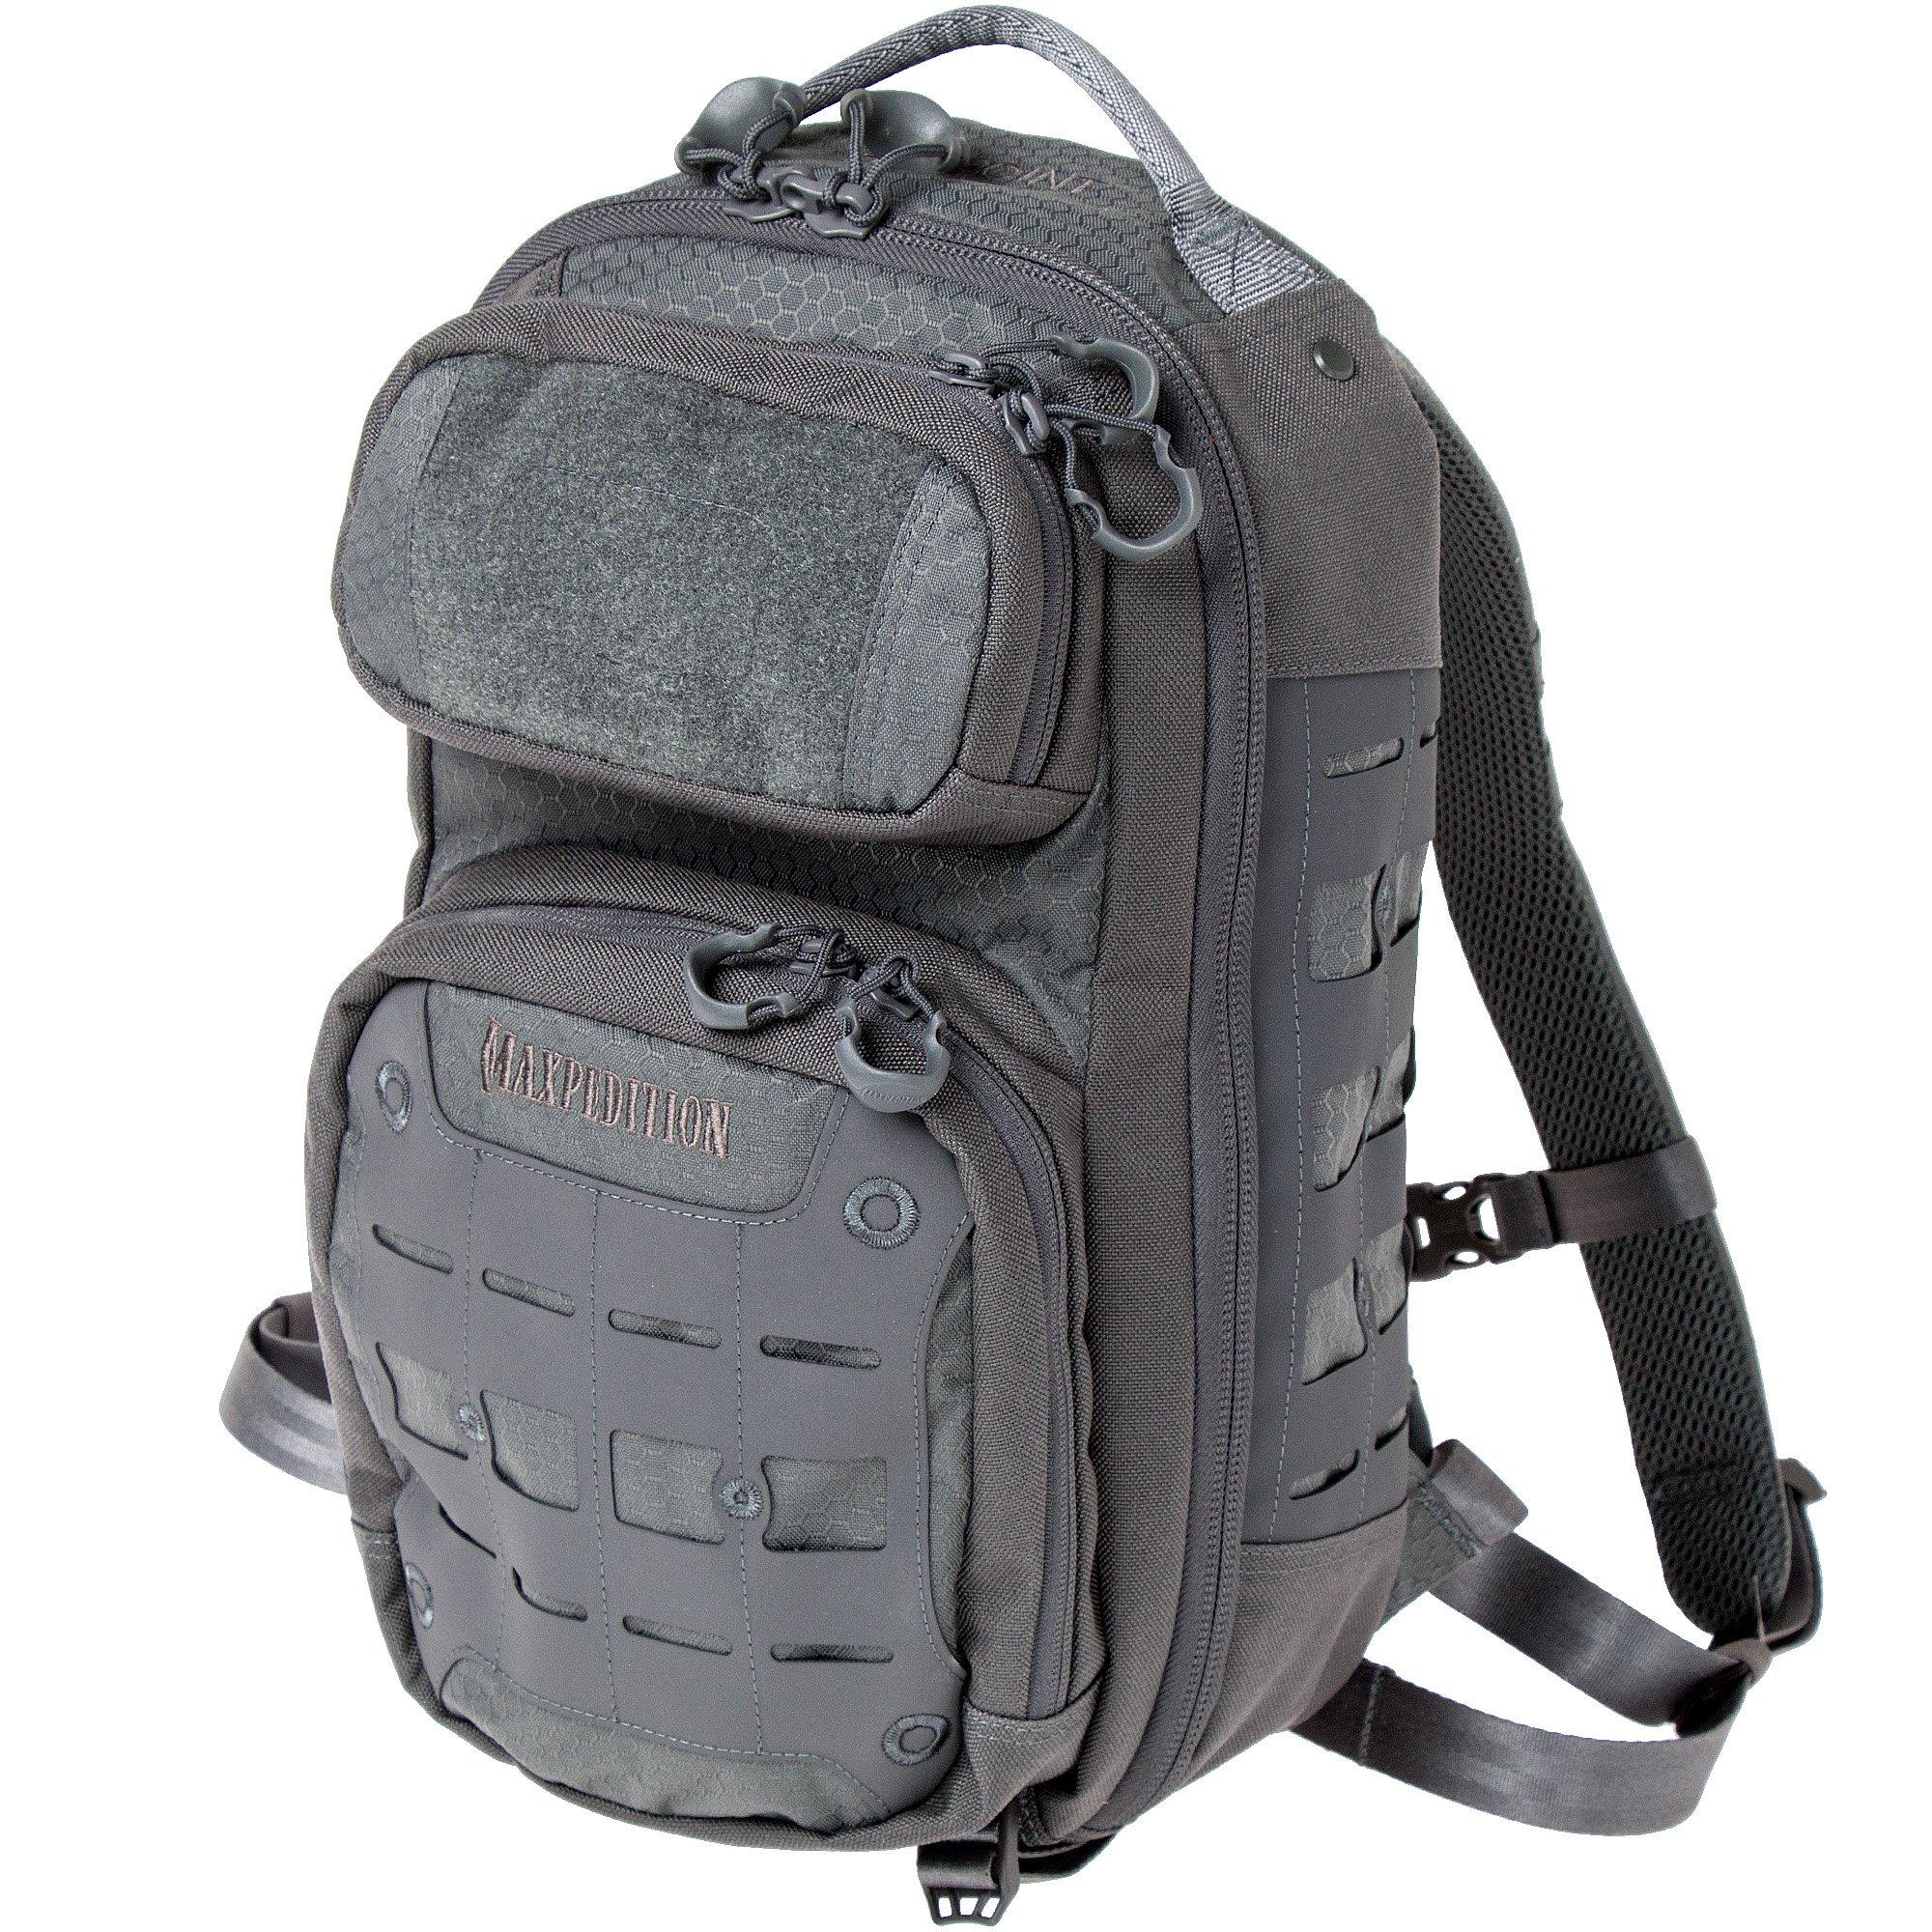 Maxpedition Riftpoint Backpack Gray 15L RPTGRY, tactical backpack